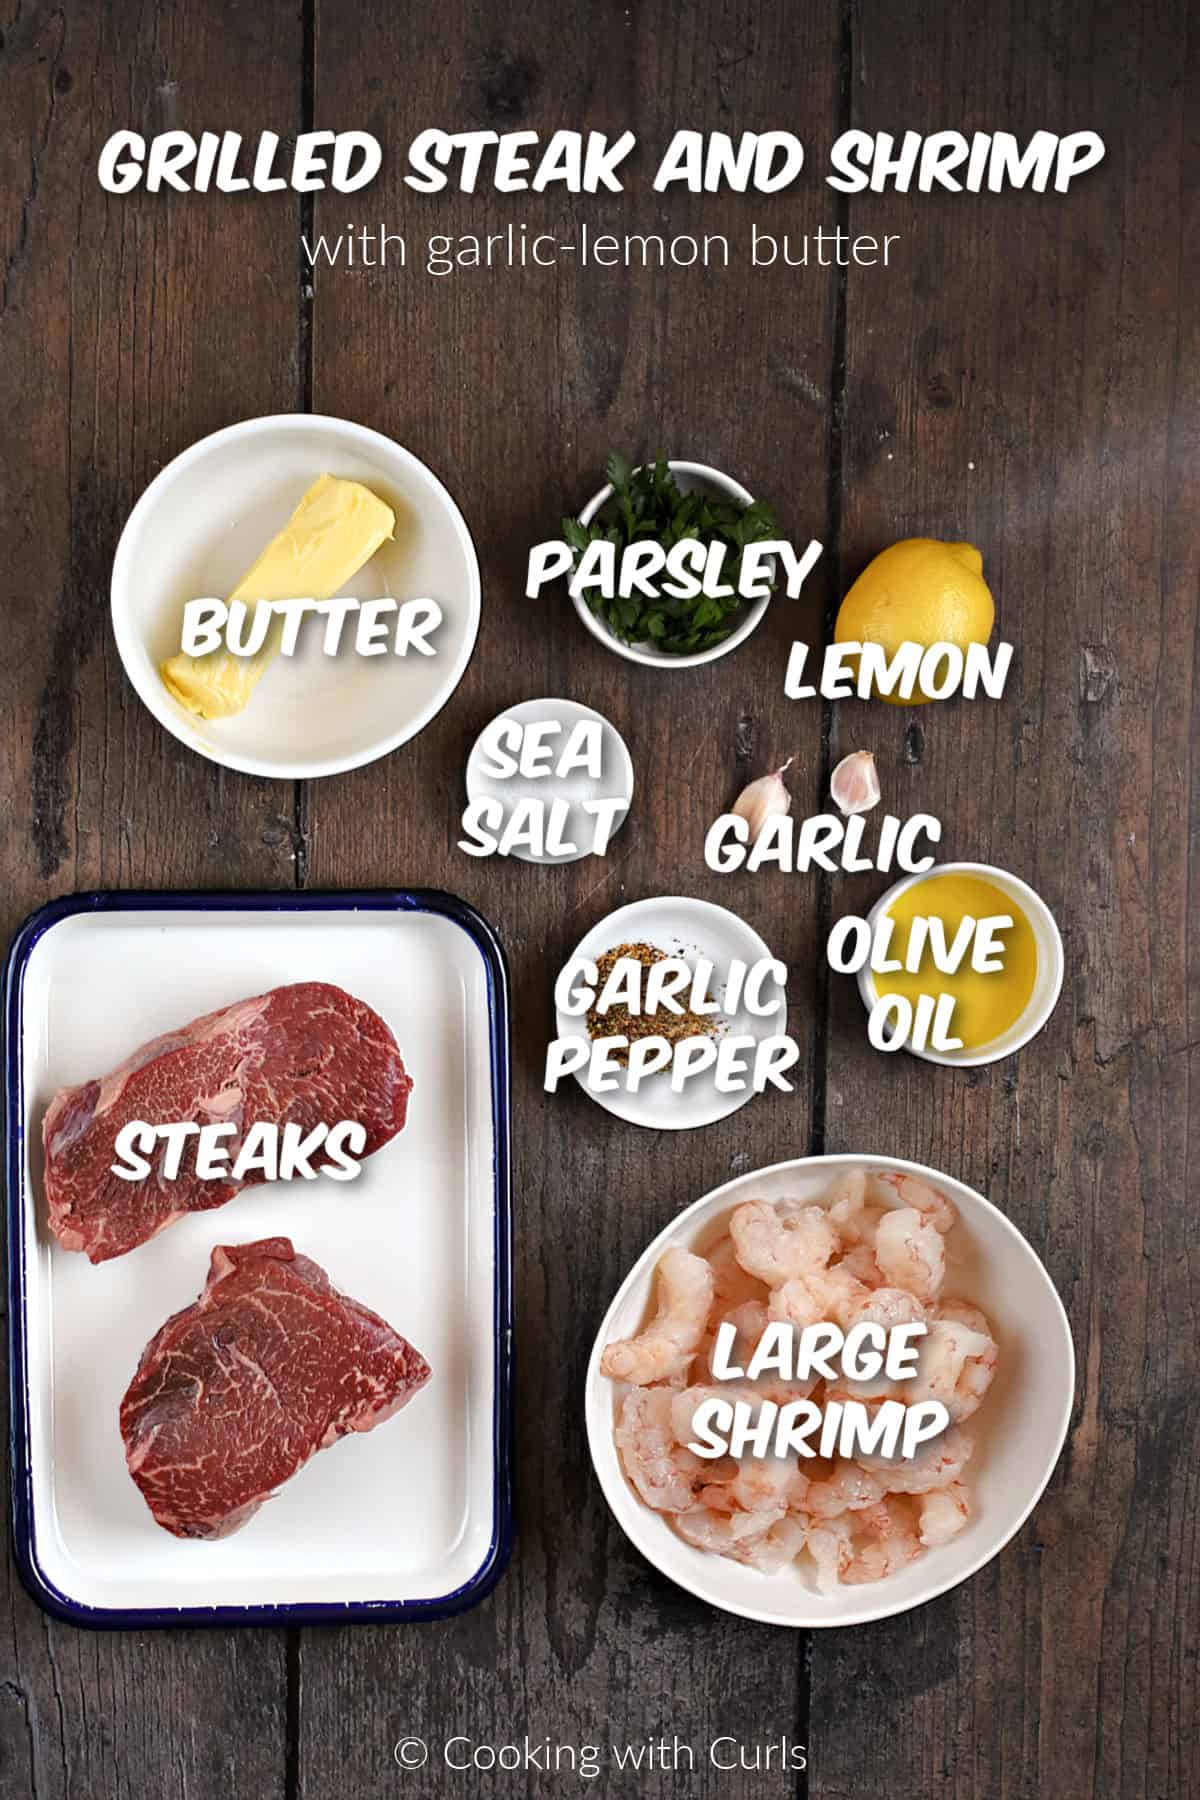 Ingredients needed to make grilled steak and shrimp with garlic-lemon butter.